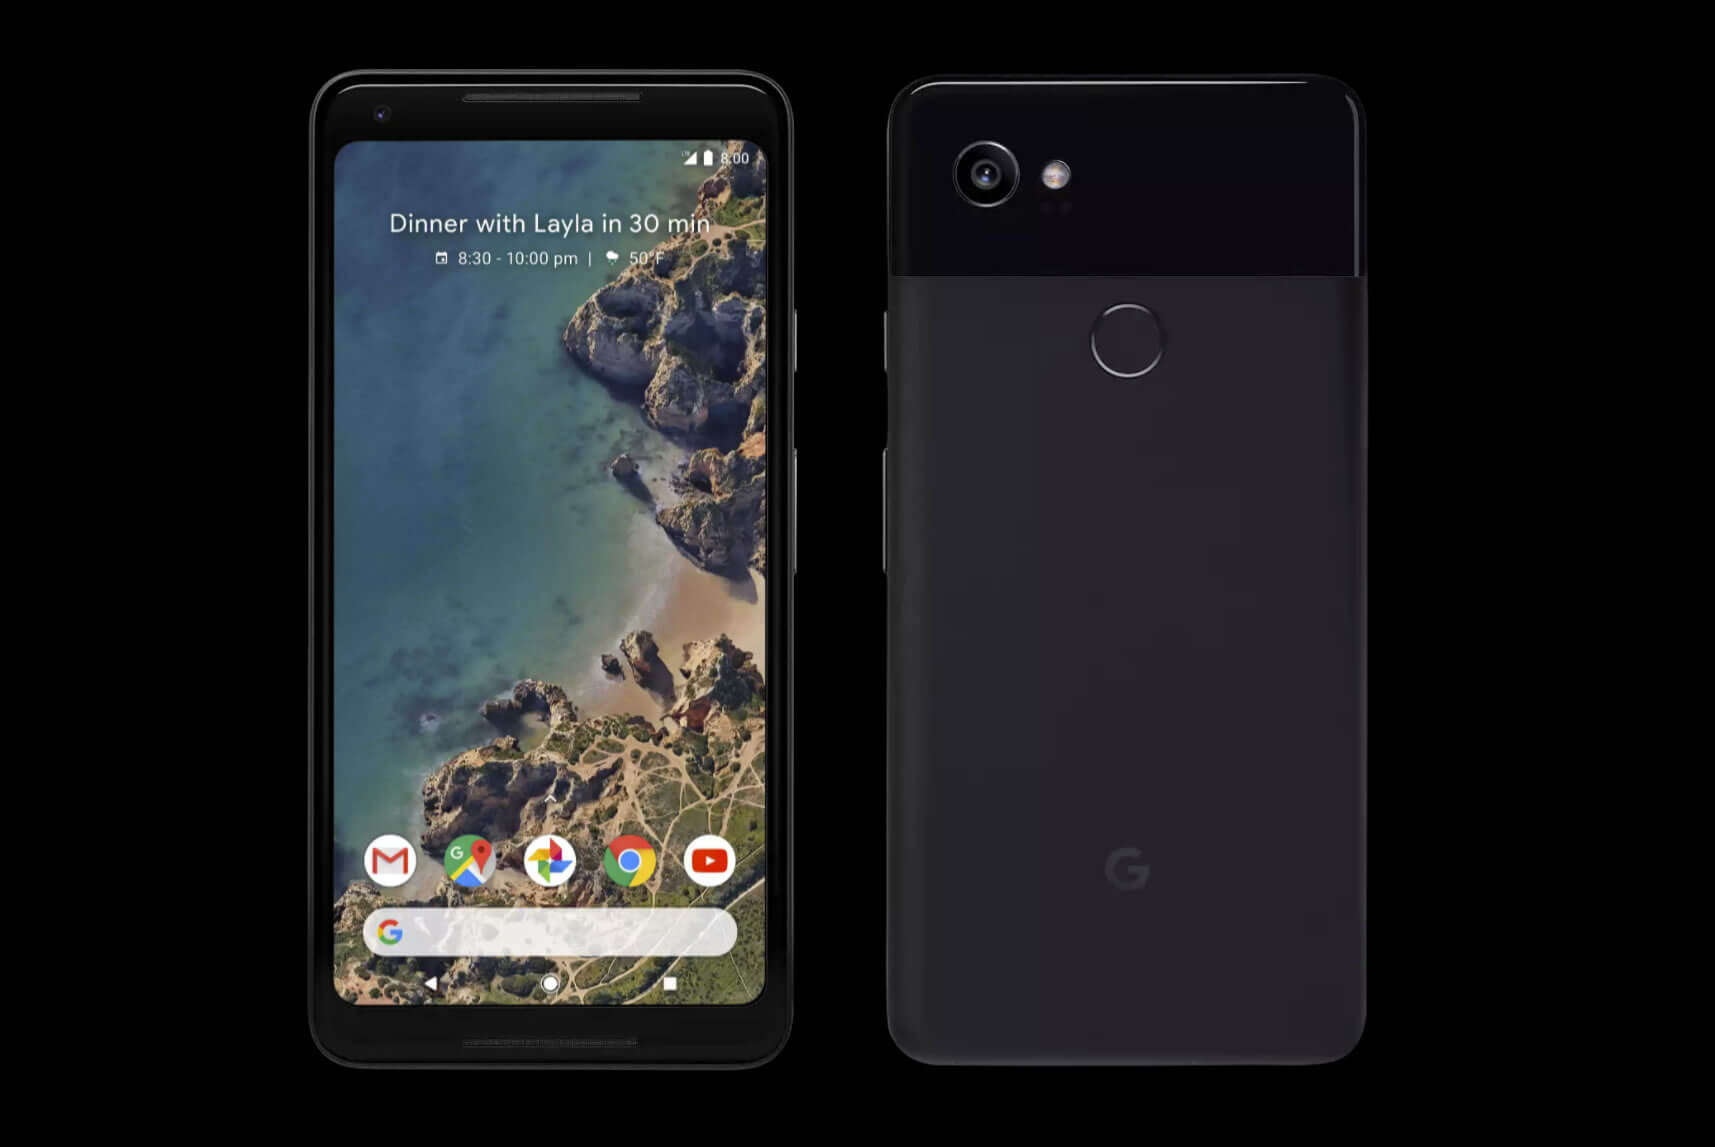 This is the new Google Pixel 2